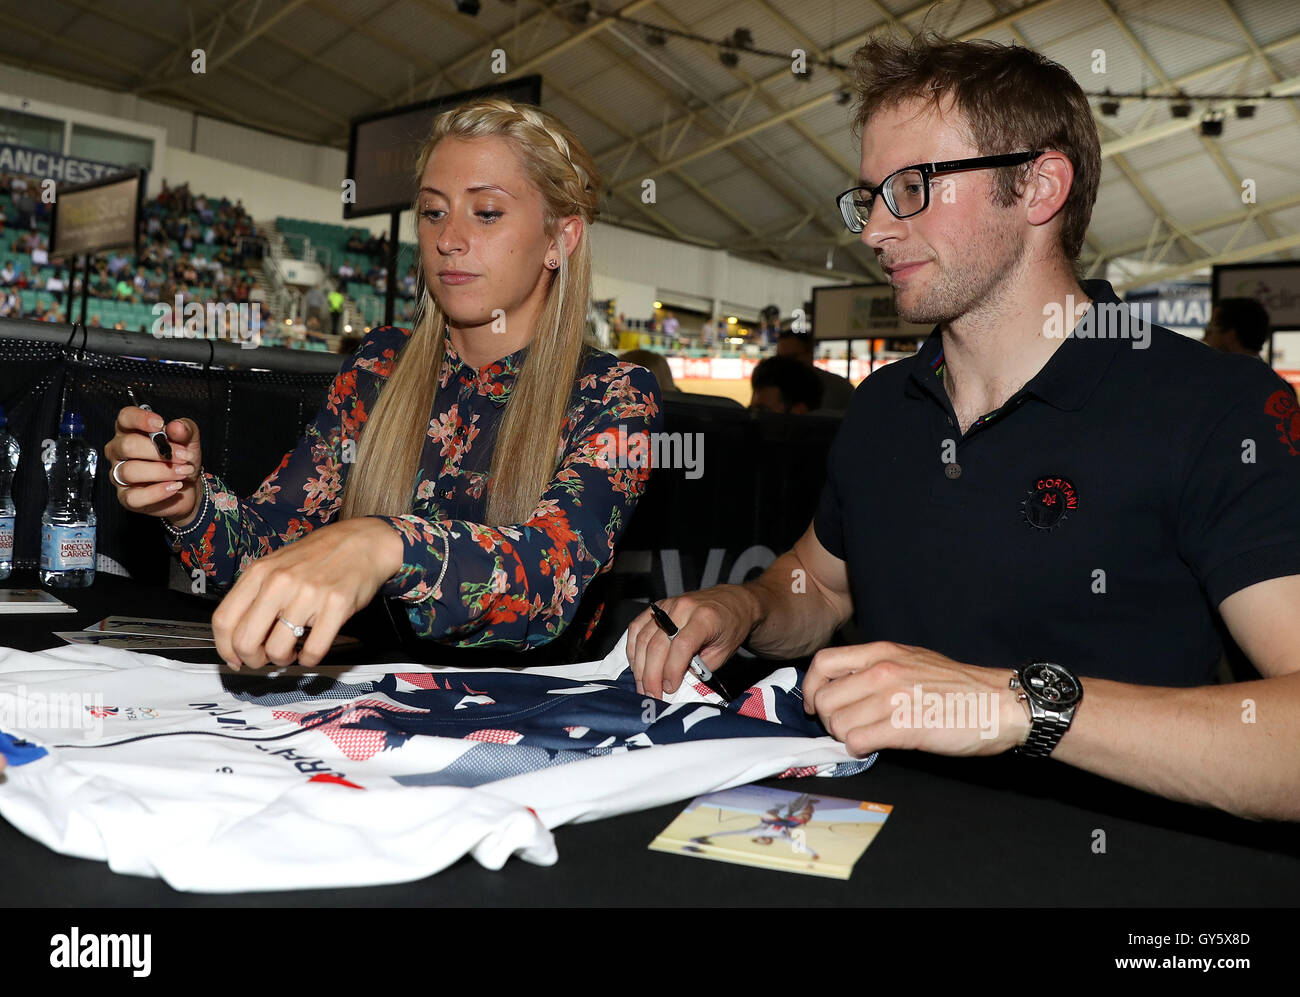 Laura Trott and Jason Kenny sign autographs before the Revolution Series at the National Cycling Centre, Manchester. PRESS ASSOCIATION Photo. Picture date: Saturday September 17, 2016. See PA story CYCLING Manchester. Photo credit should read: Martin Rickett/PA Wire. RESTRICTIONS: Use subject to restrictions. Editorial use only. No commercial use. Call +44 (0)1158 447447 for further information. Stock Photo